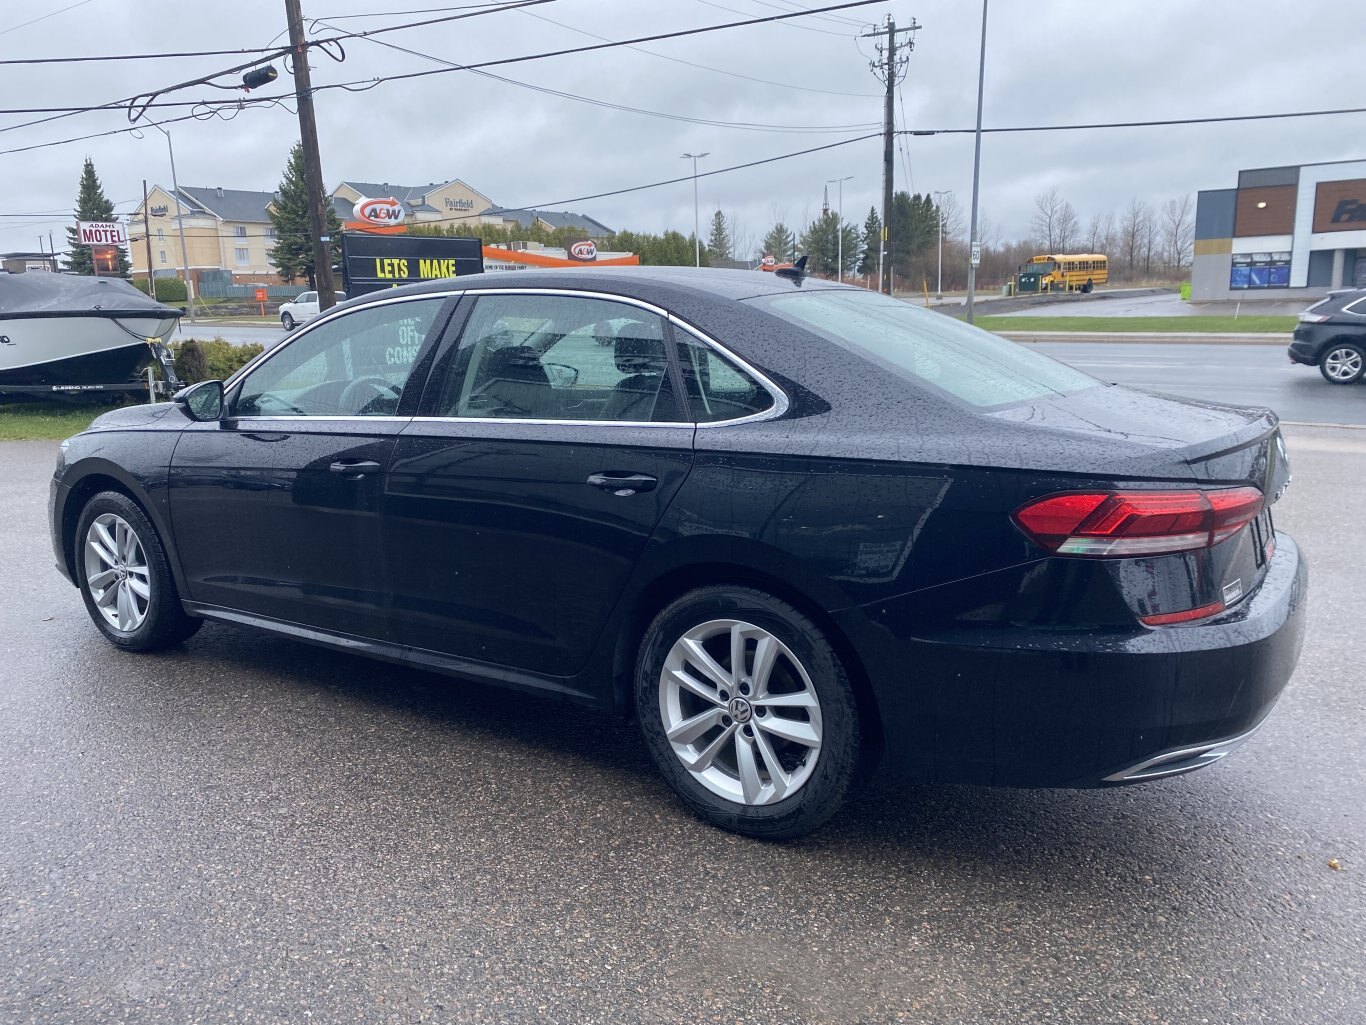 2021 VOLKSWAGEN PASSAT HIGHLINE FWD WITH SUNROOF, LEATHER SEATS, HEATED SEATS AND REAR VIEW CAMERA!!